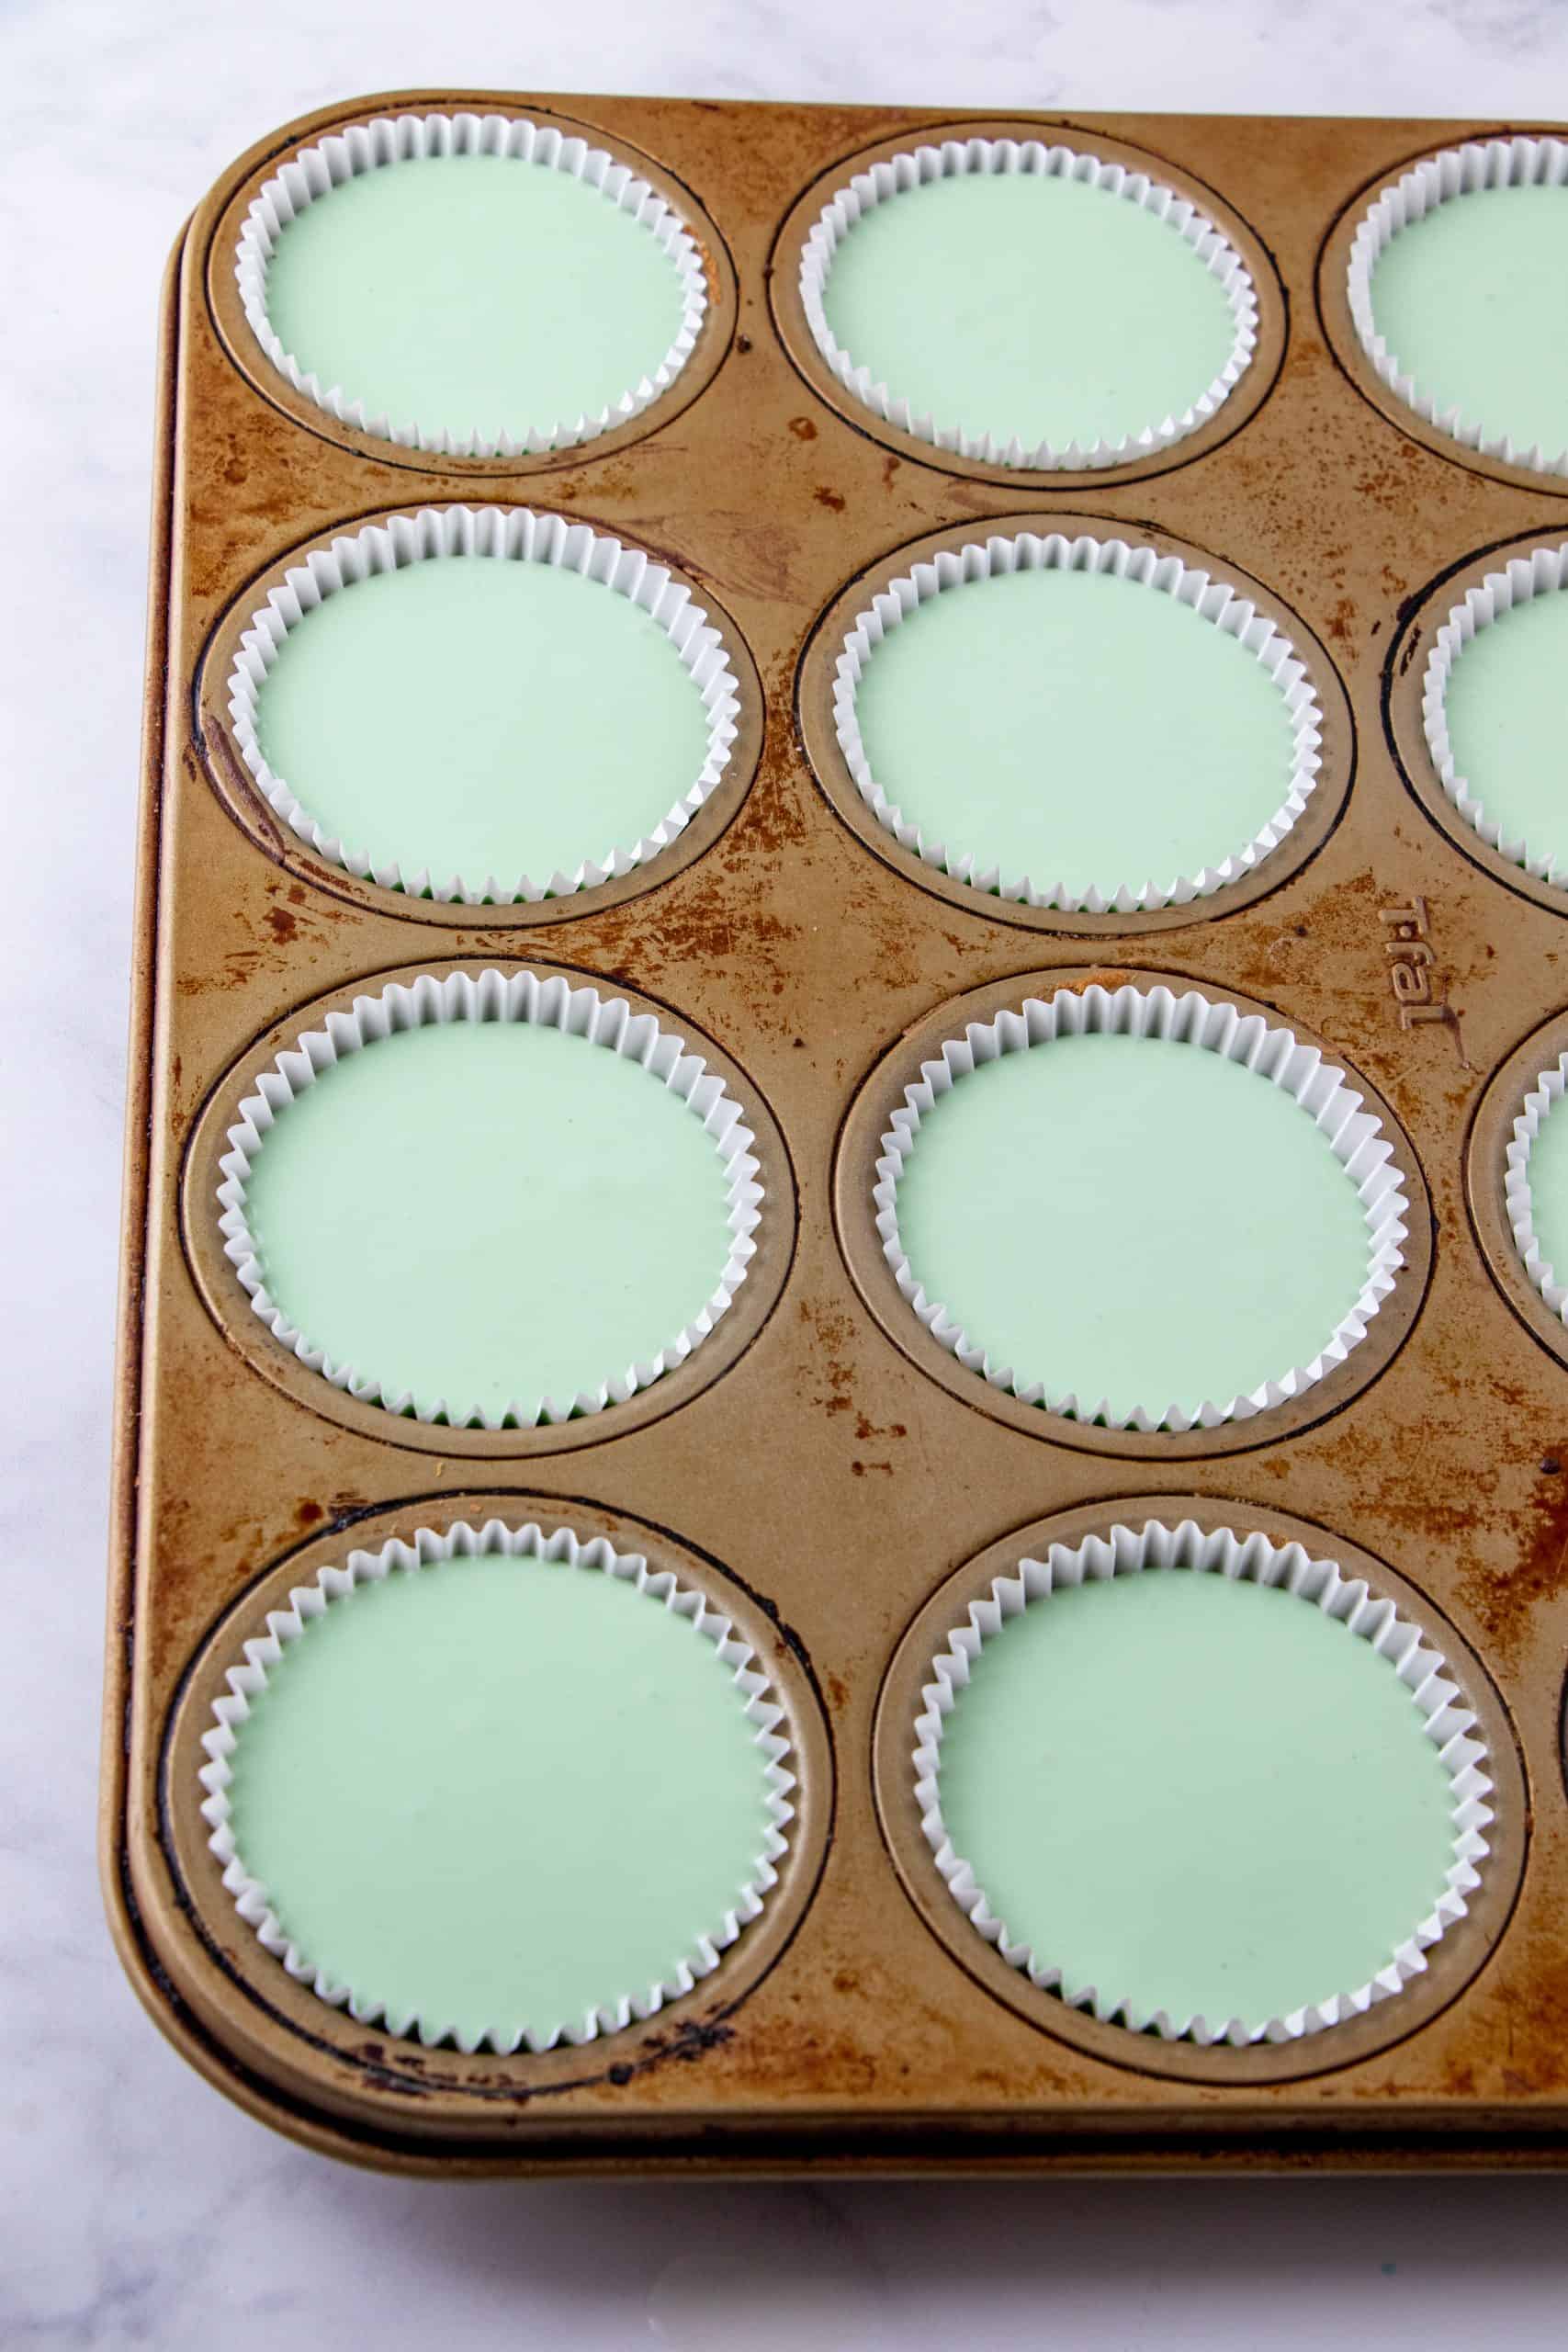 Cheesecake batter mixture in paper liners in a muffin tin.